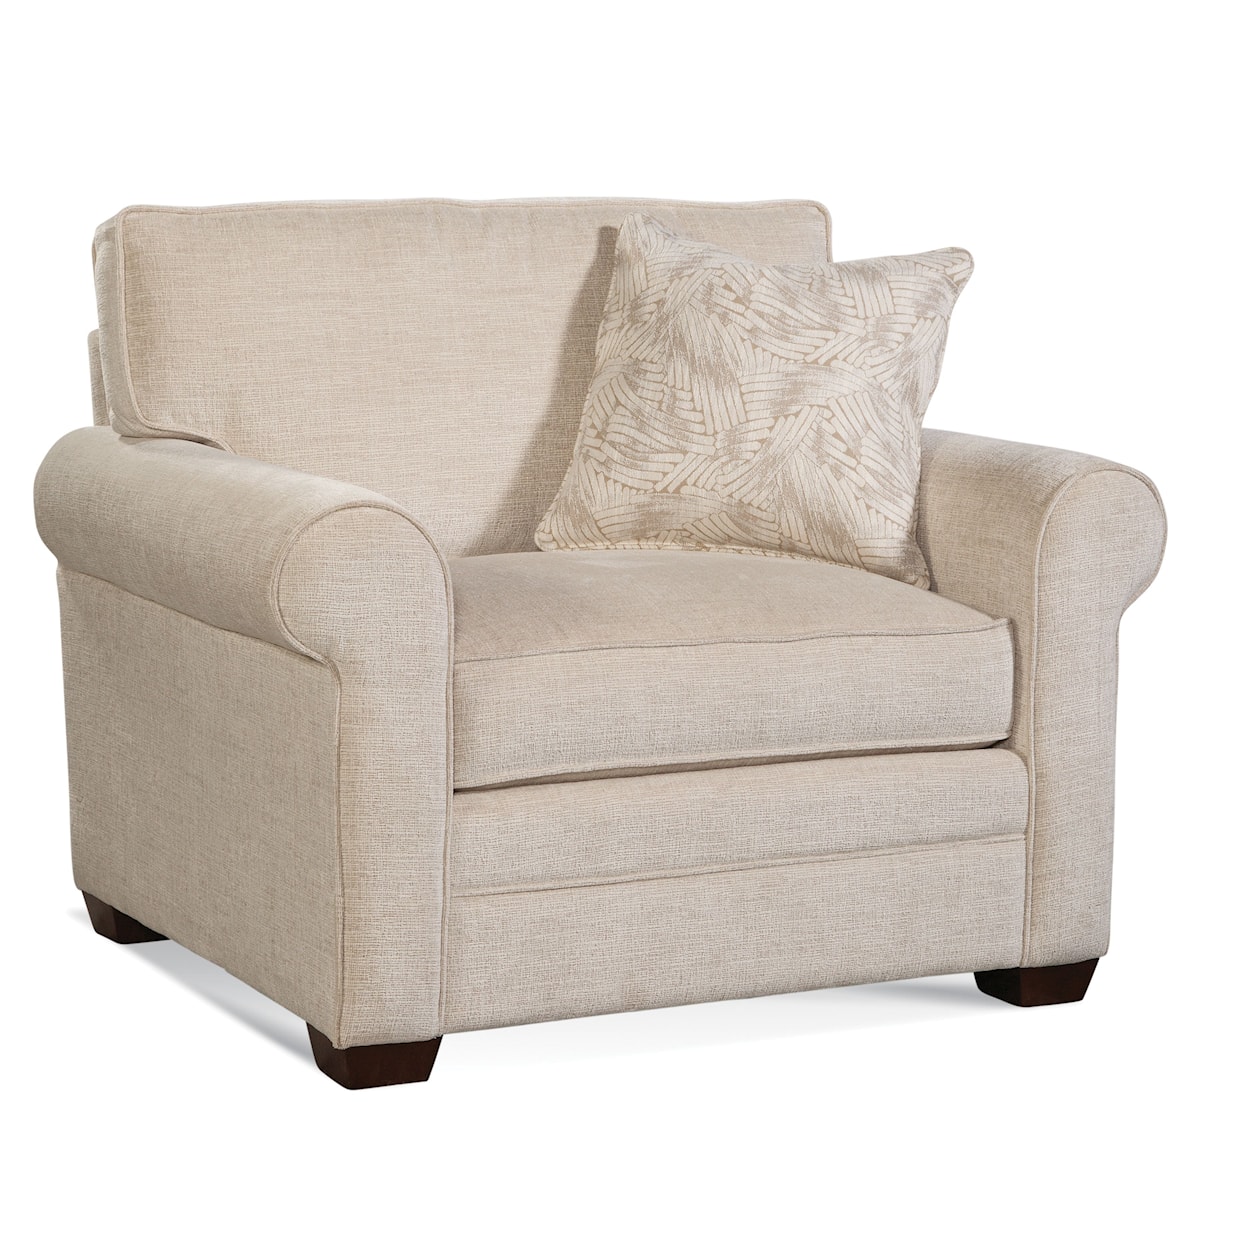 Braxton Culler Bedford Upholstered Chairs